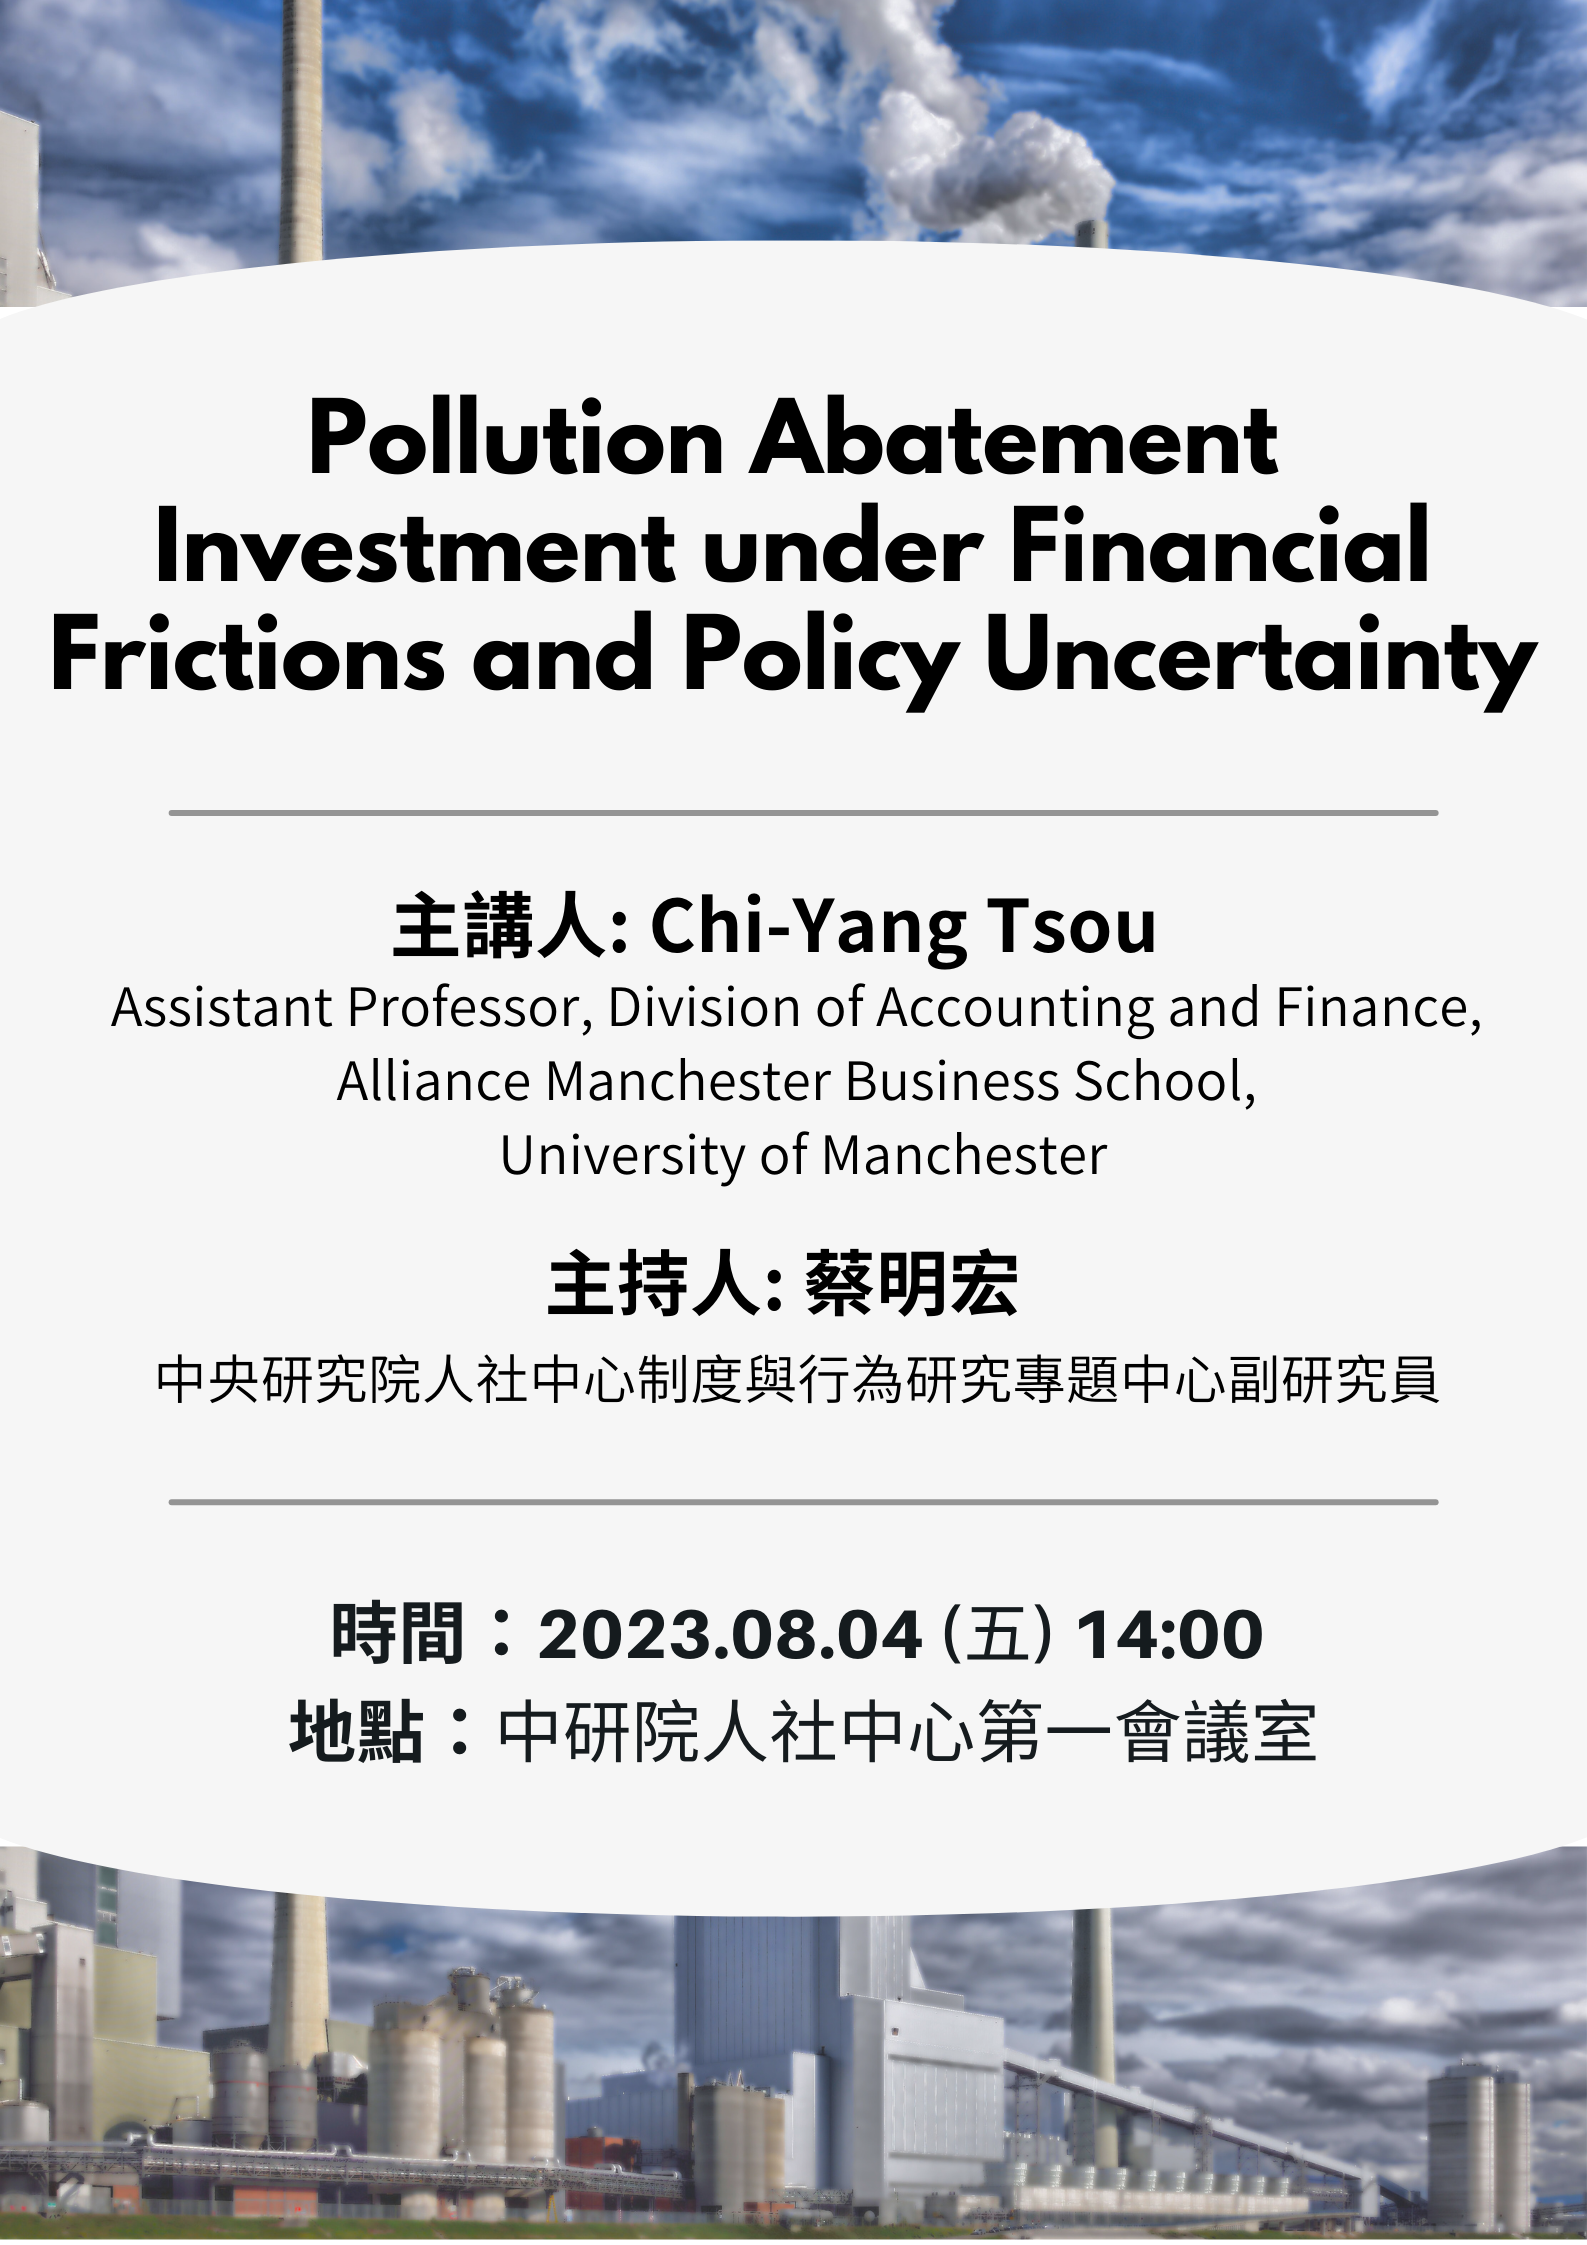 Pollution Abatement Investment under Financial Frictions and Policy Uncertainty